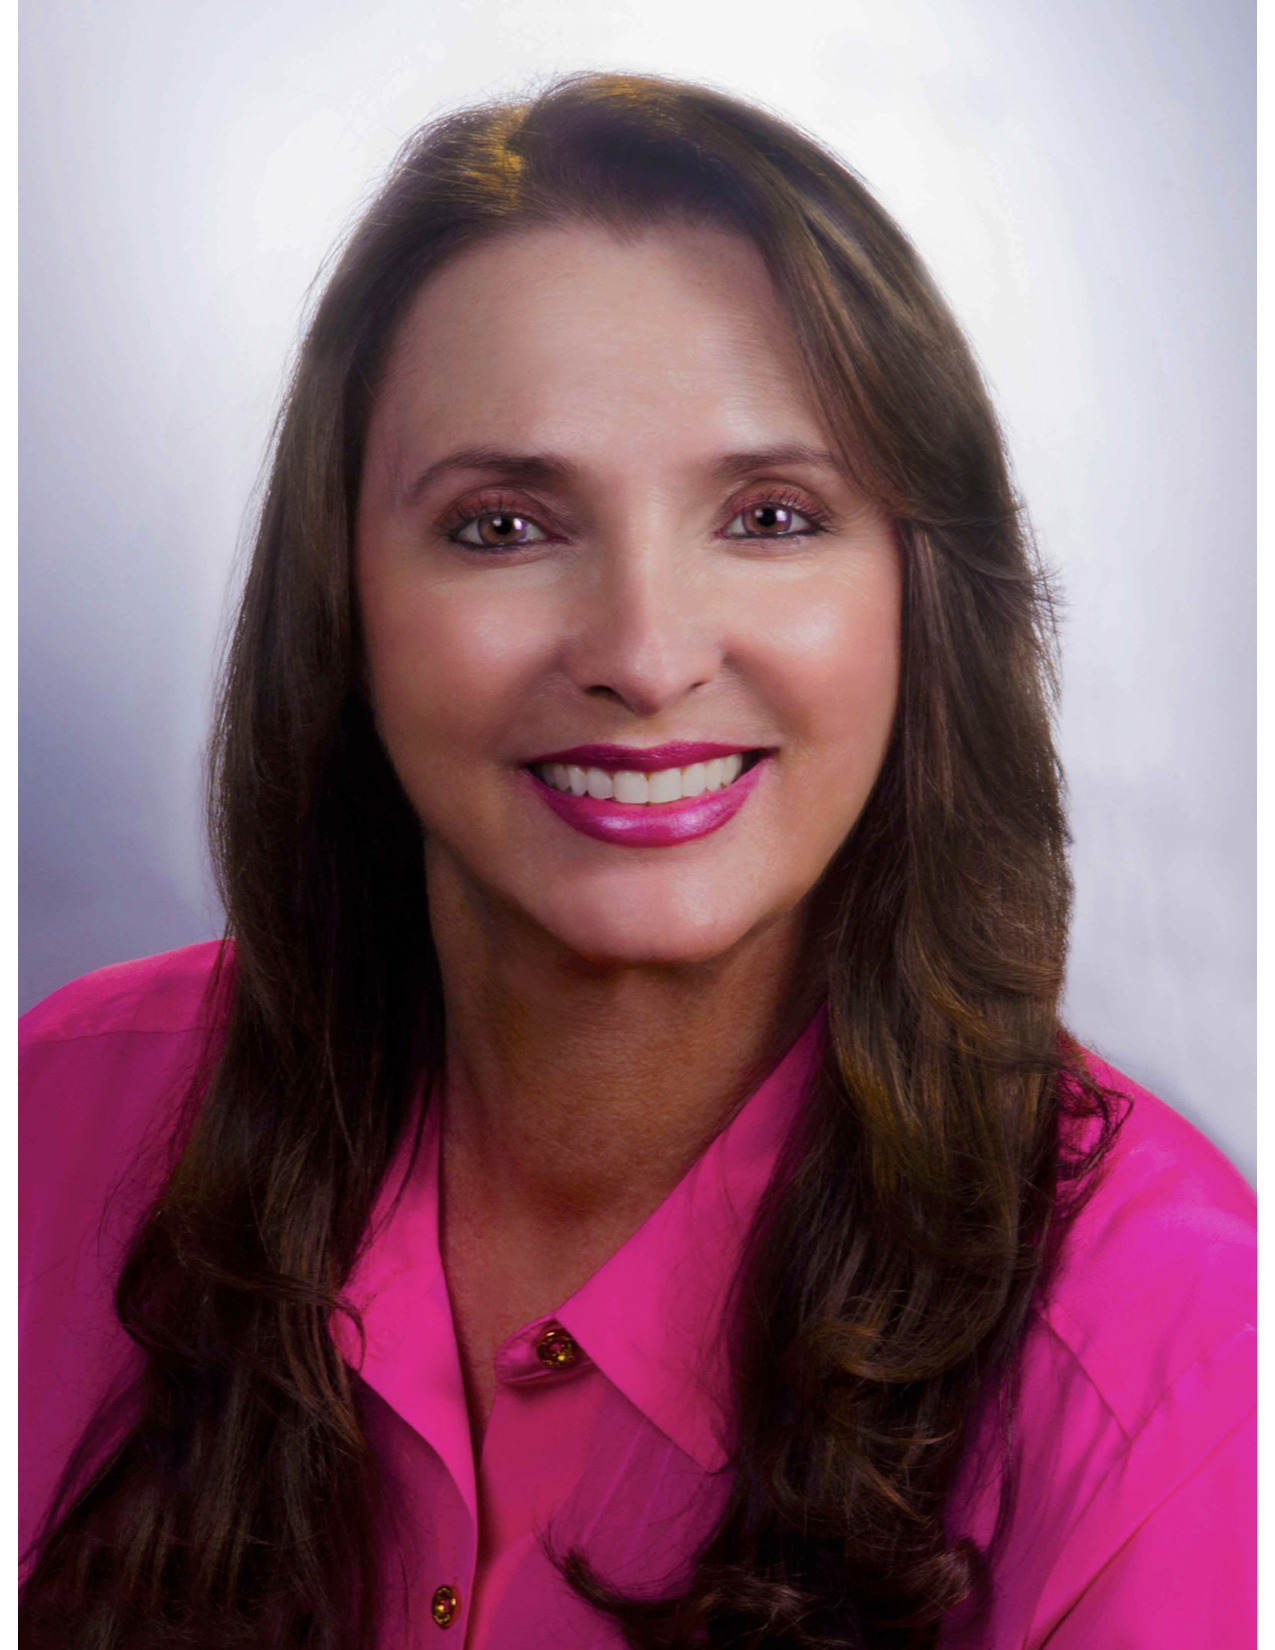 A head shot of Lee Ann Mancini, author of the children's Christian book series "Adventures of the Sea Kids".